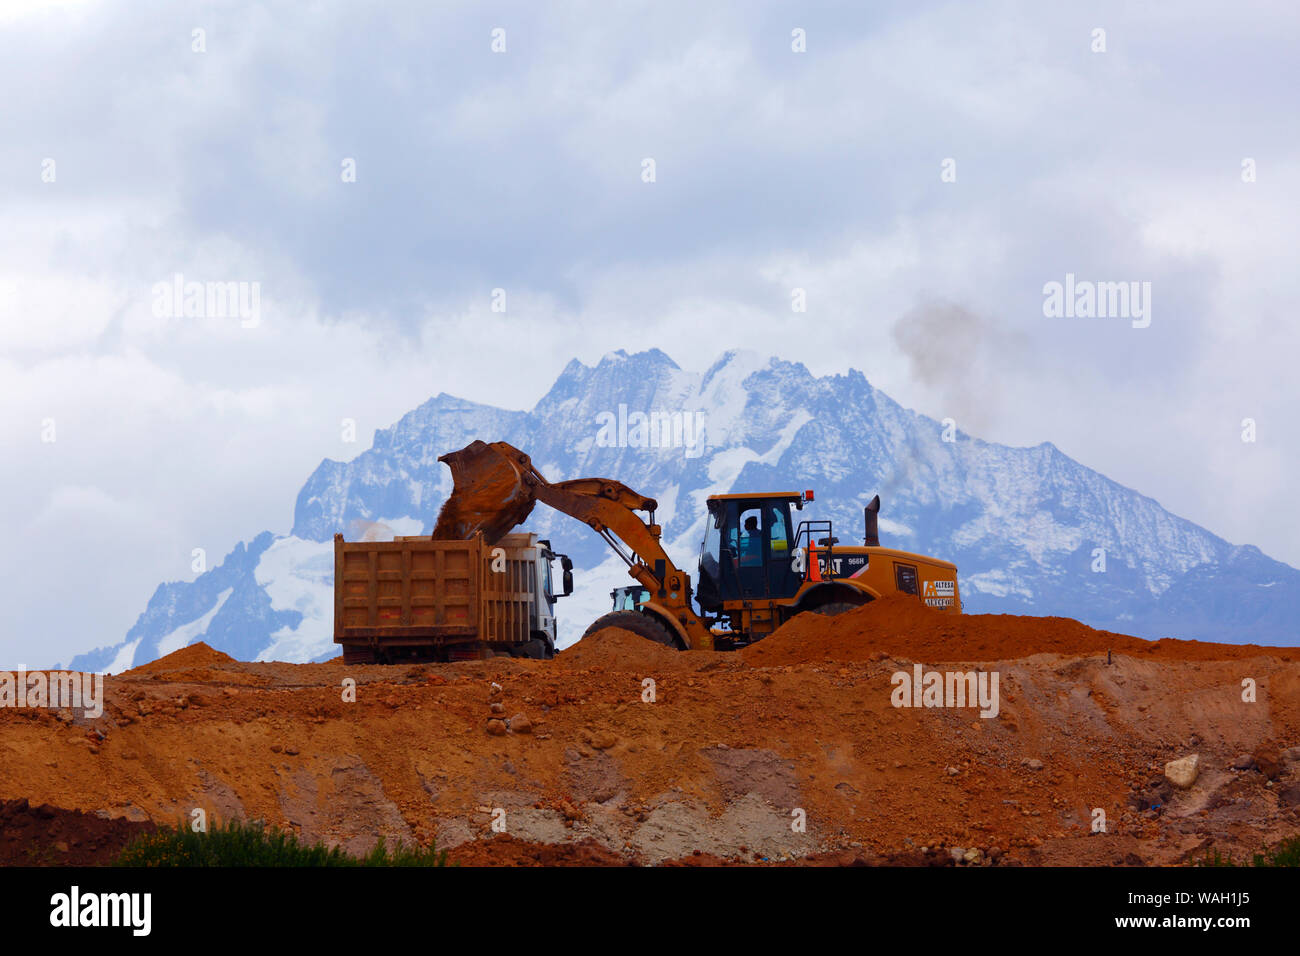 Heavy machinery working moving earth, the start of construction at the site of a new international airport at Chinchero for Cusco and Machu Picchu. In the background is Mt Chicon, one of the peaks of the Cordillera Urubamba mountain range. Cusco Region, Peru Stock Photo